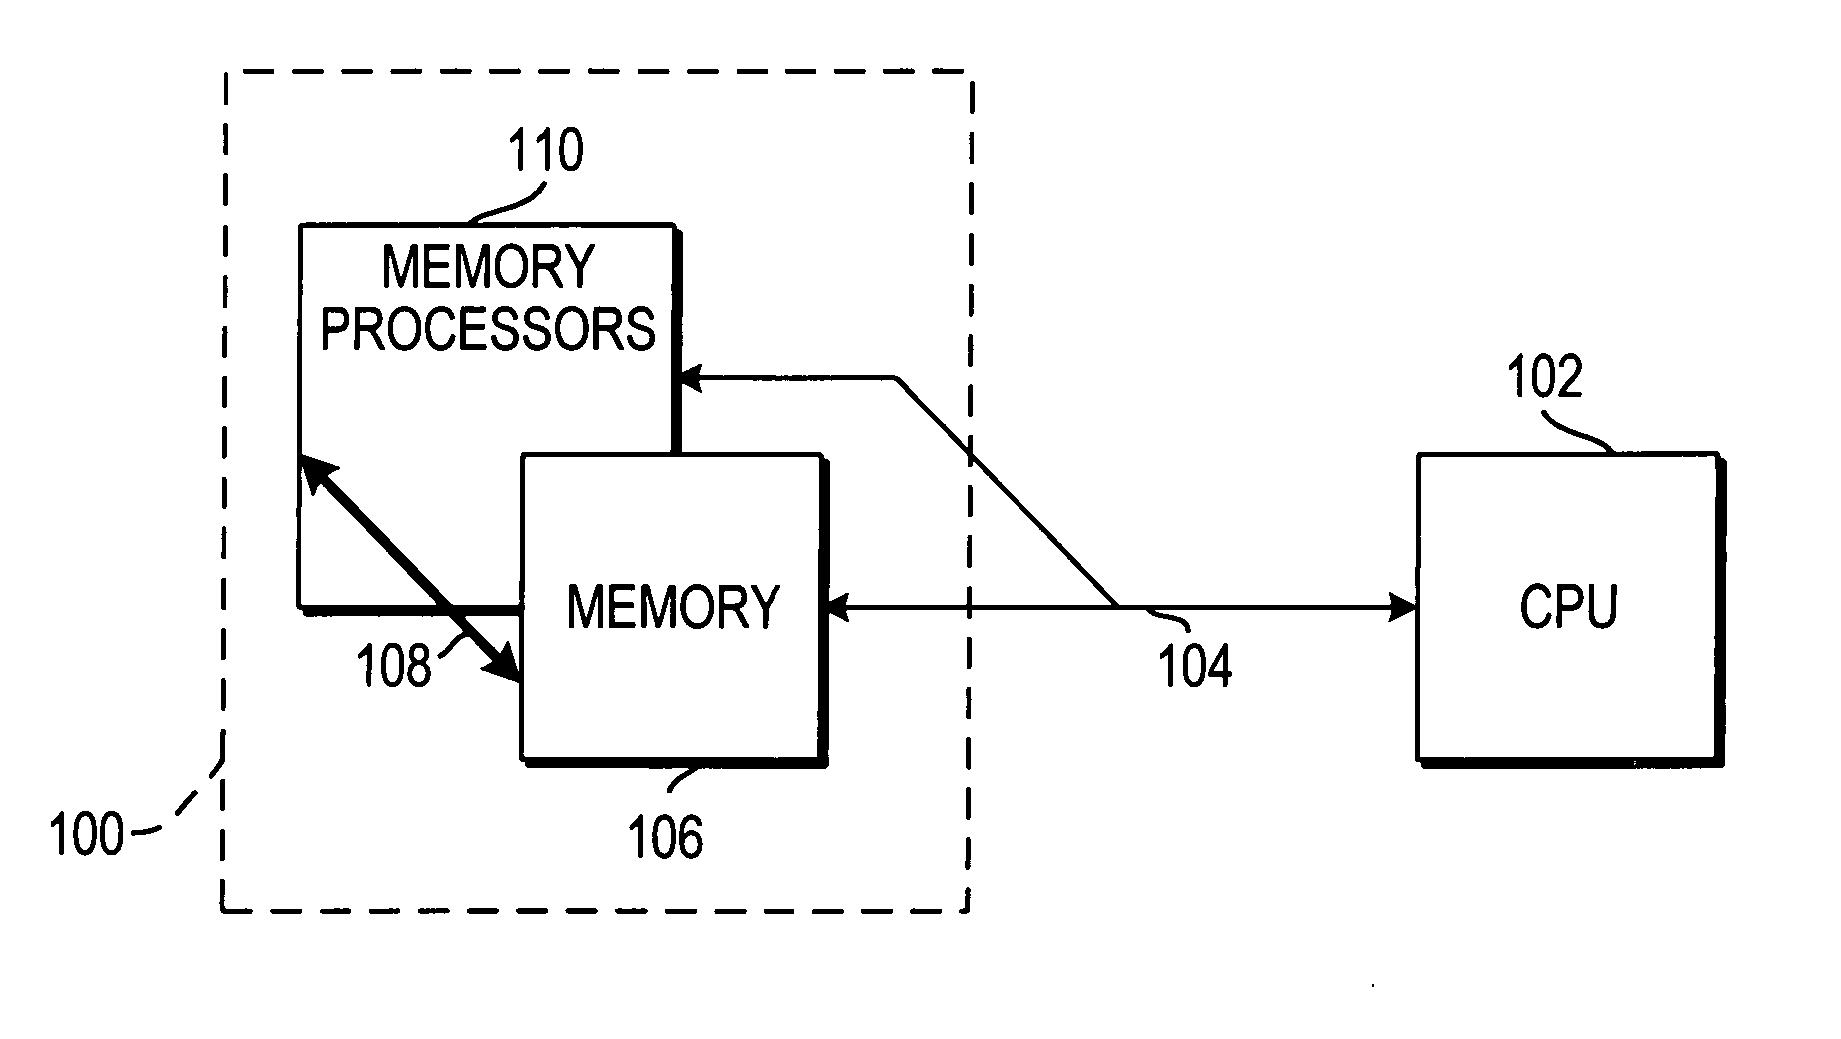 Providing a register file memory with local addressing in a SIMD parallel processor